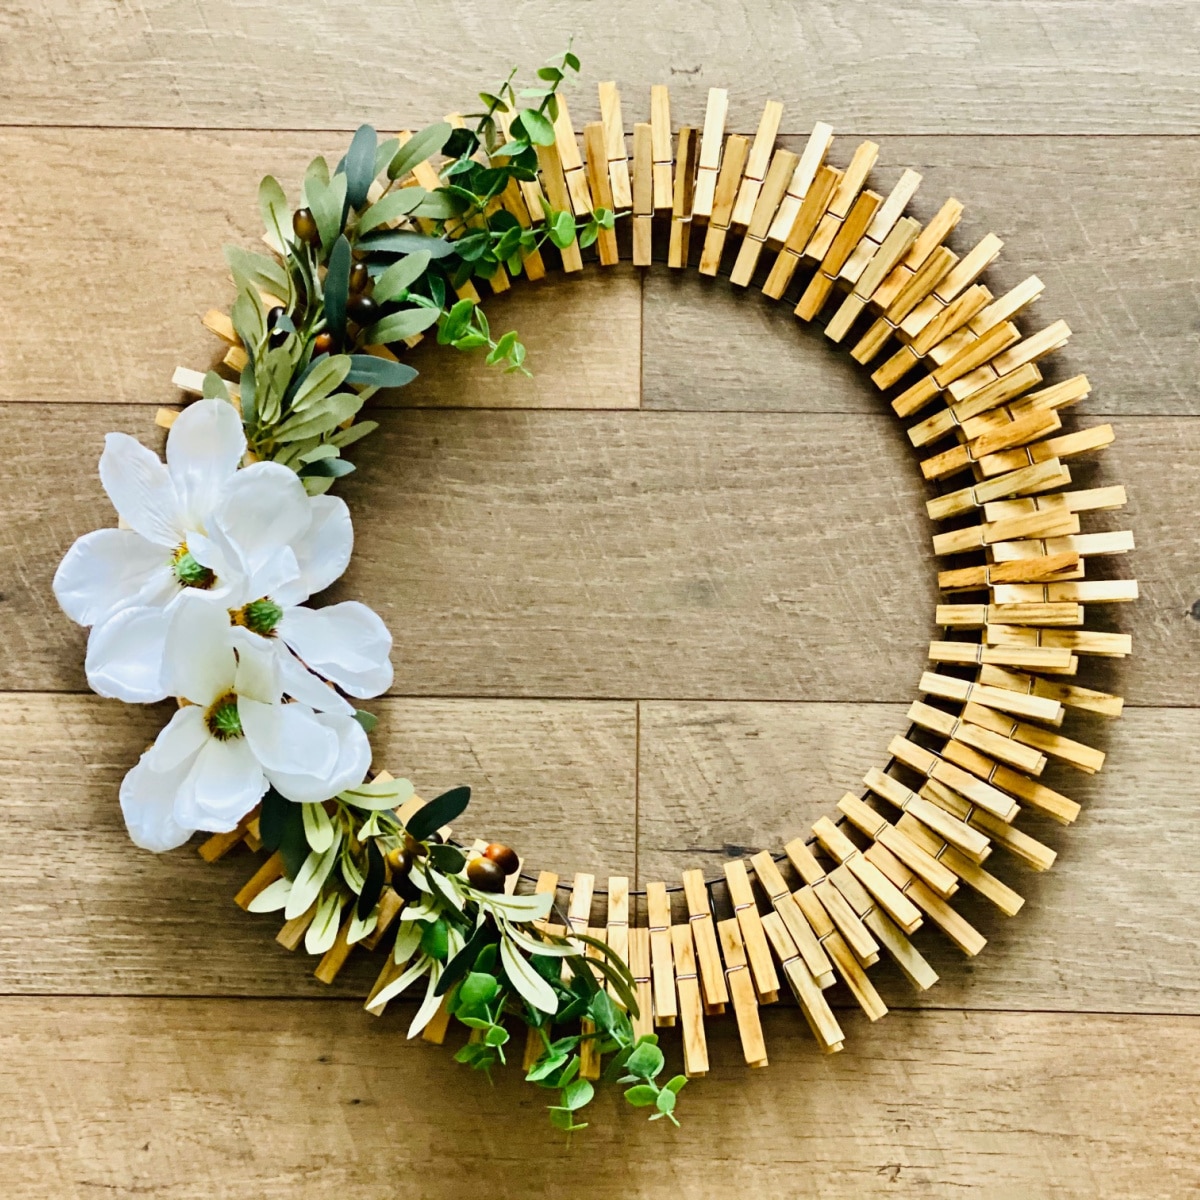 DIY Clothes Pin Wreath with greenery and magnolia flowers on a wooden background.